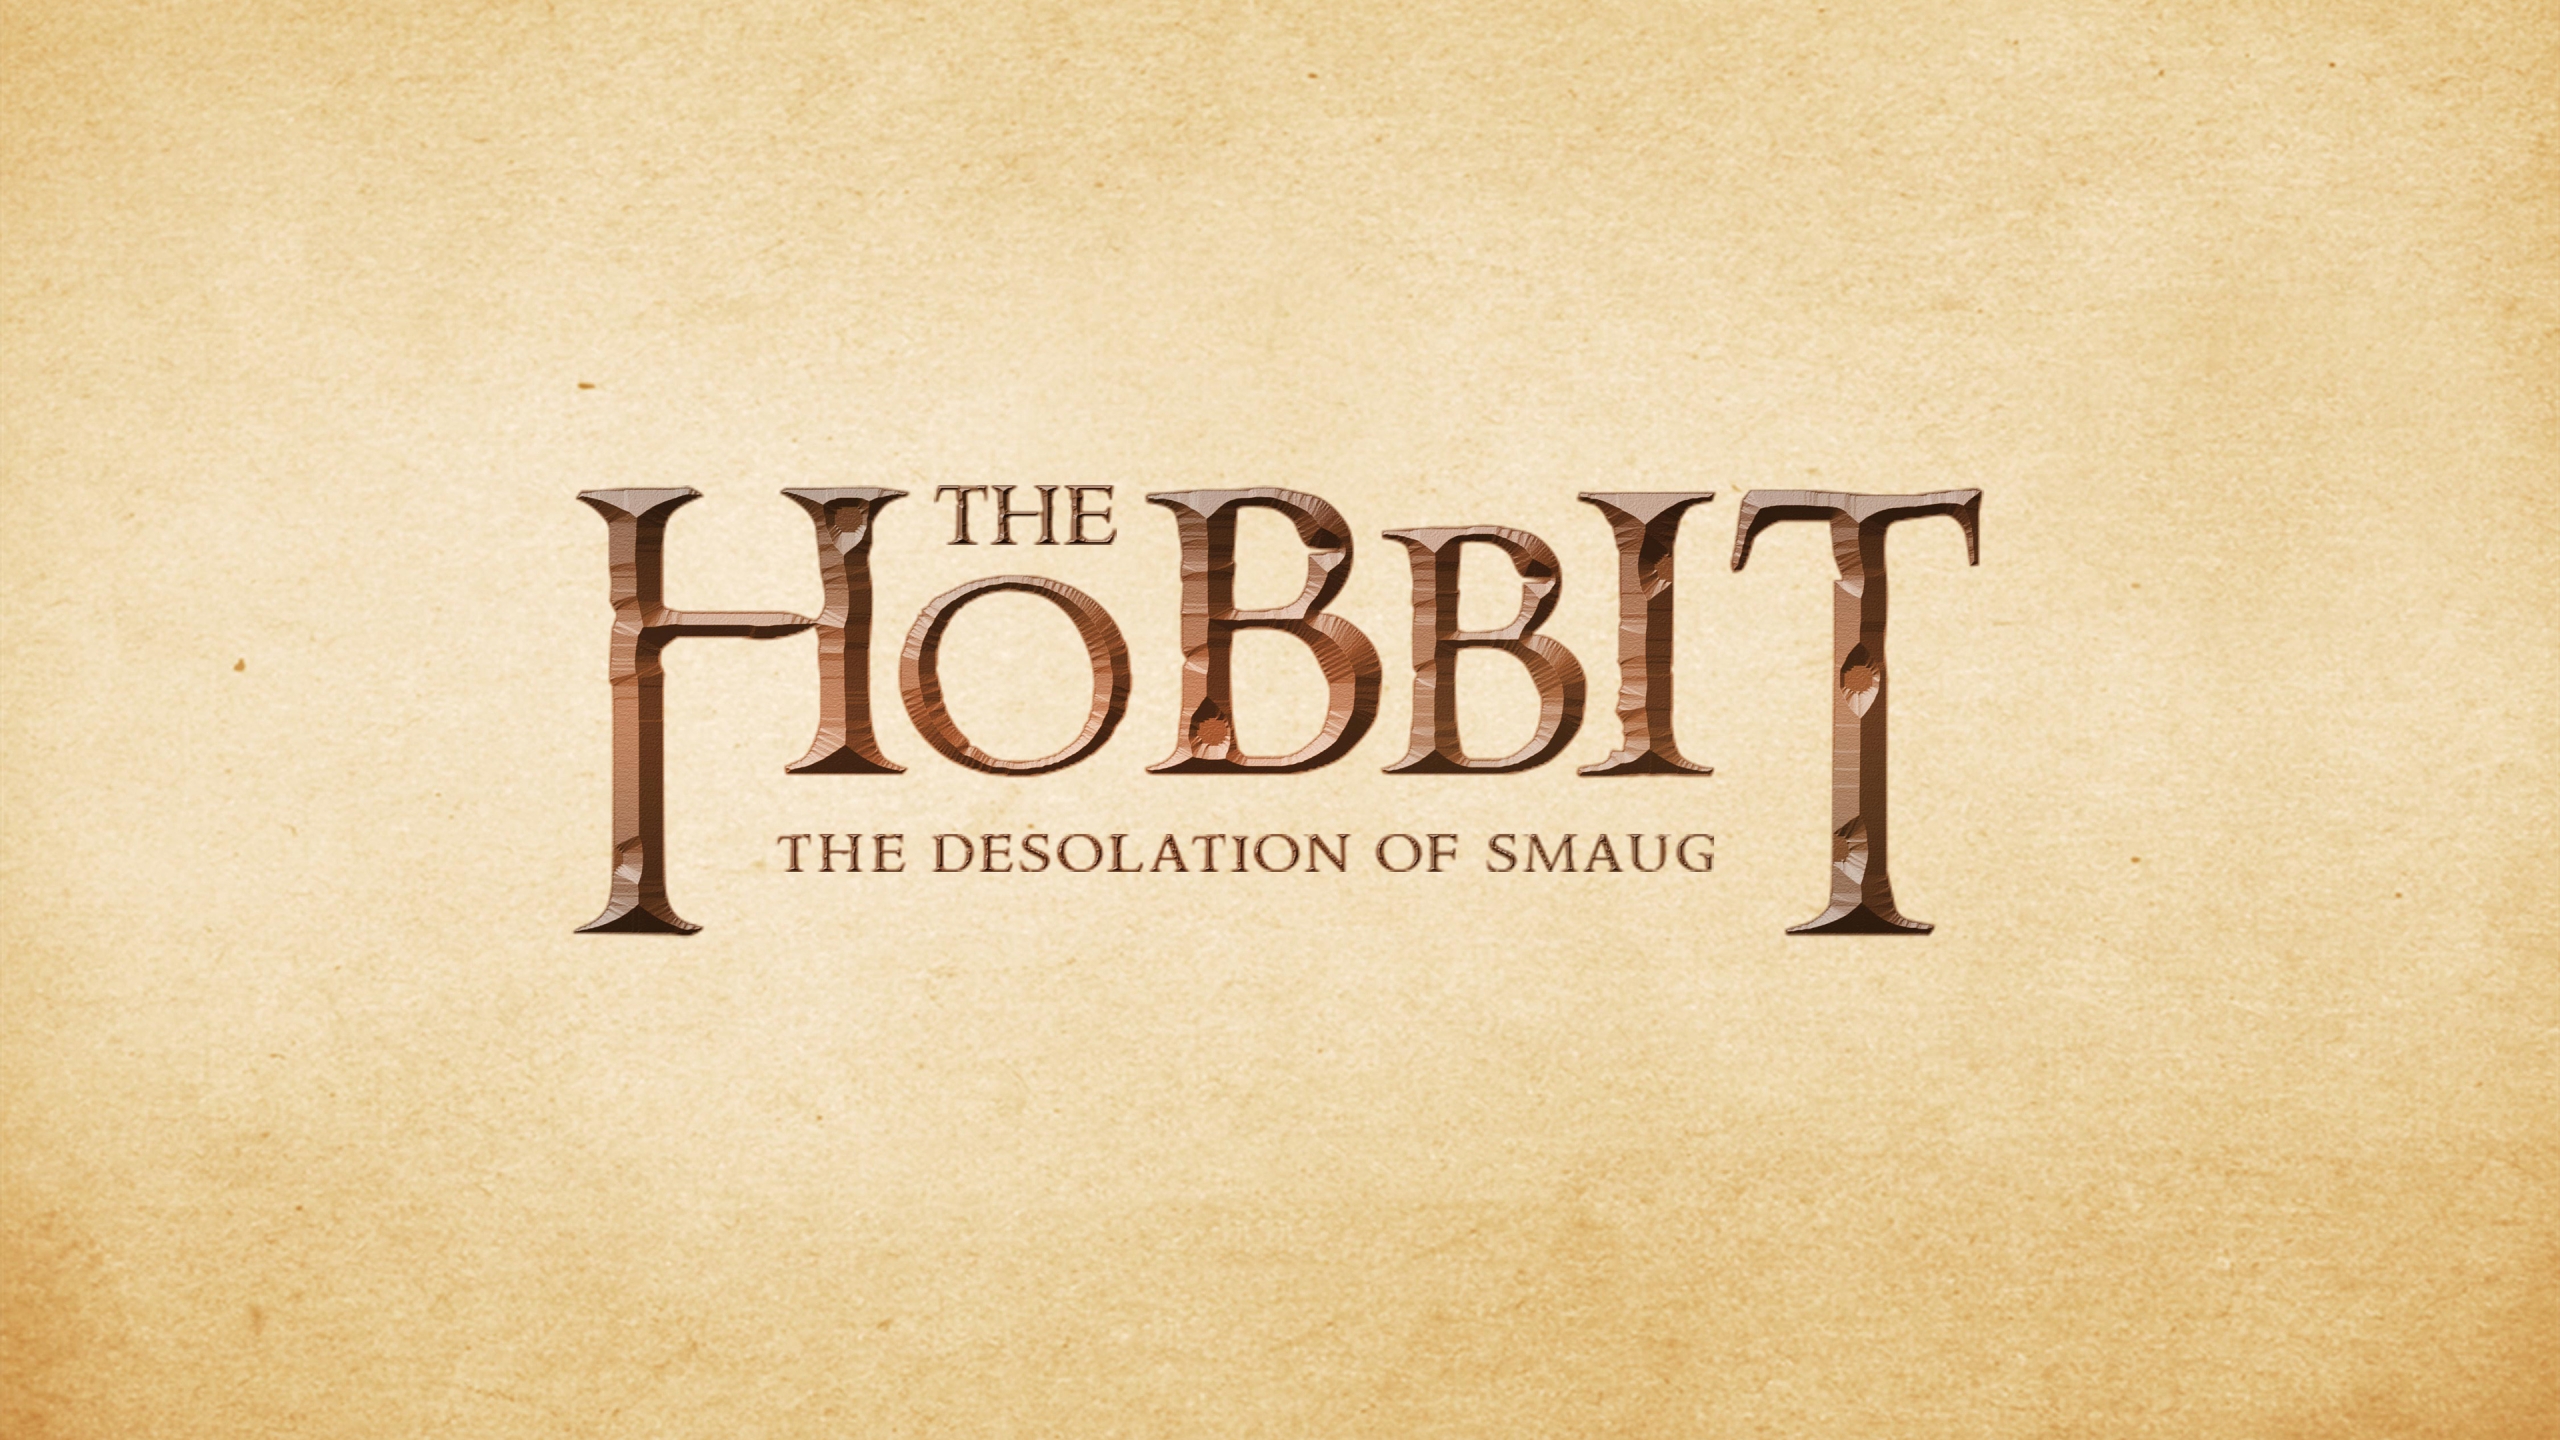 The Hobbit The Desolation of Smaug for 2560x1440 HDTV resolution